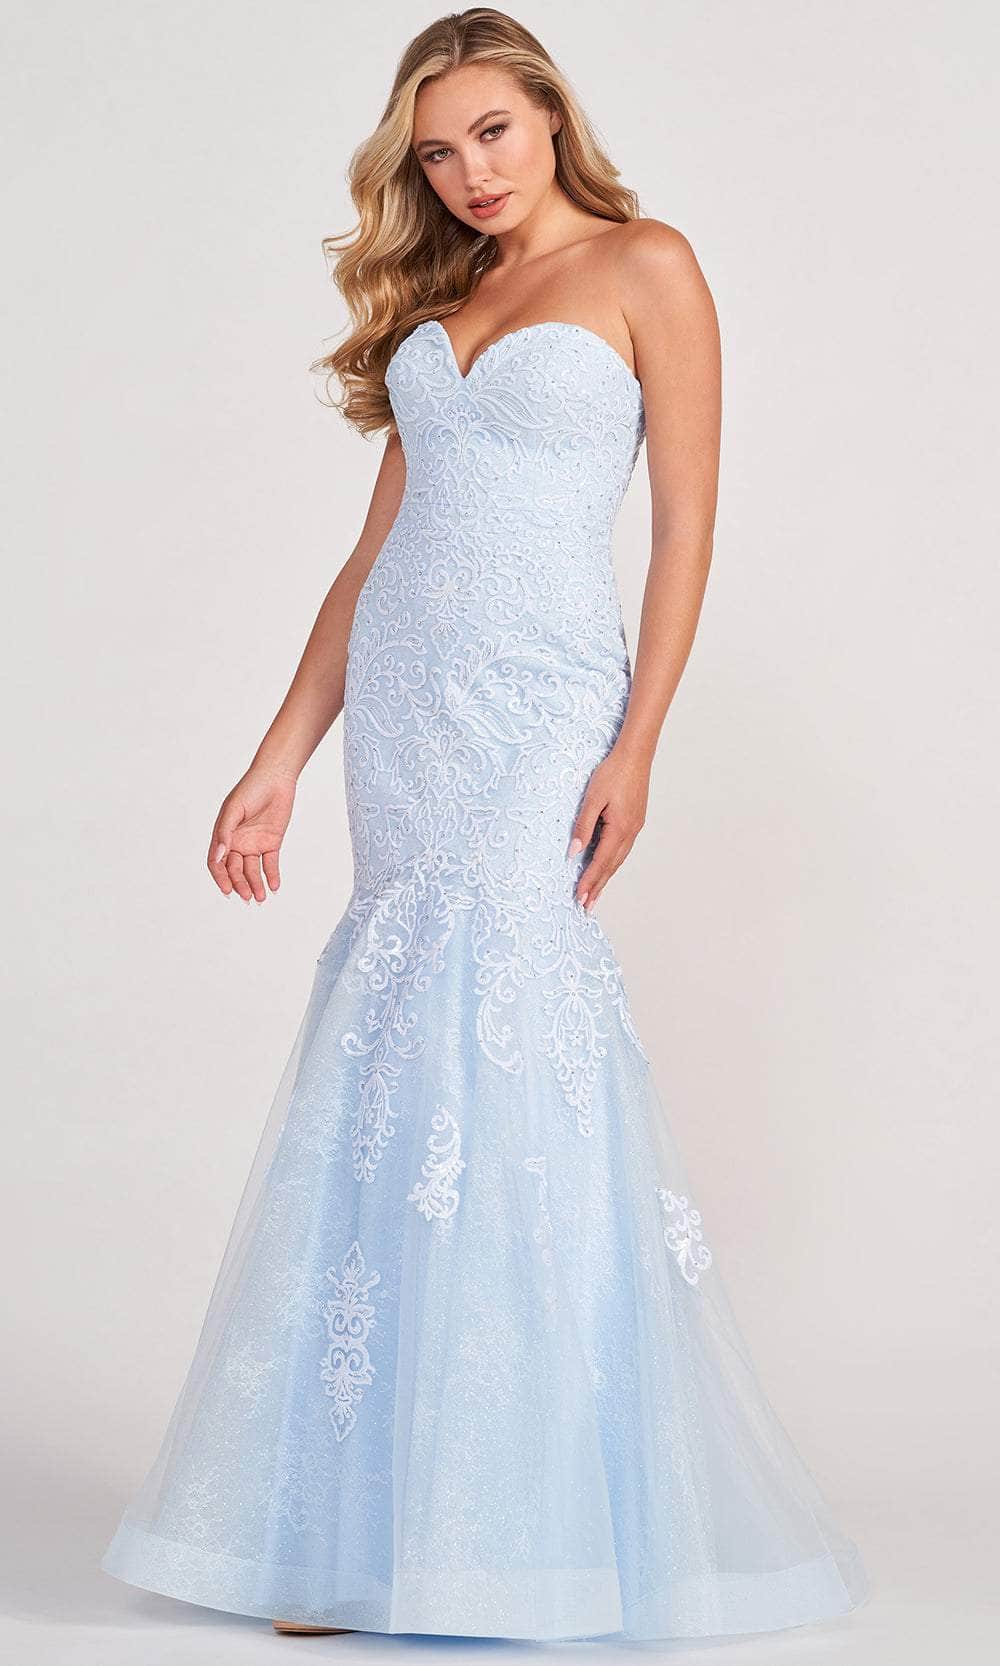 Colette for Mon Cheri CL2005 - Strapless Mermaid Prom Gown
